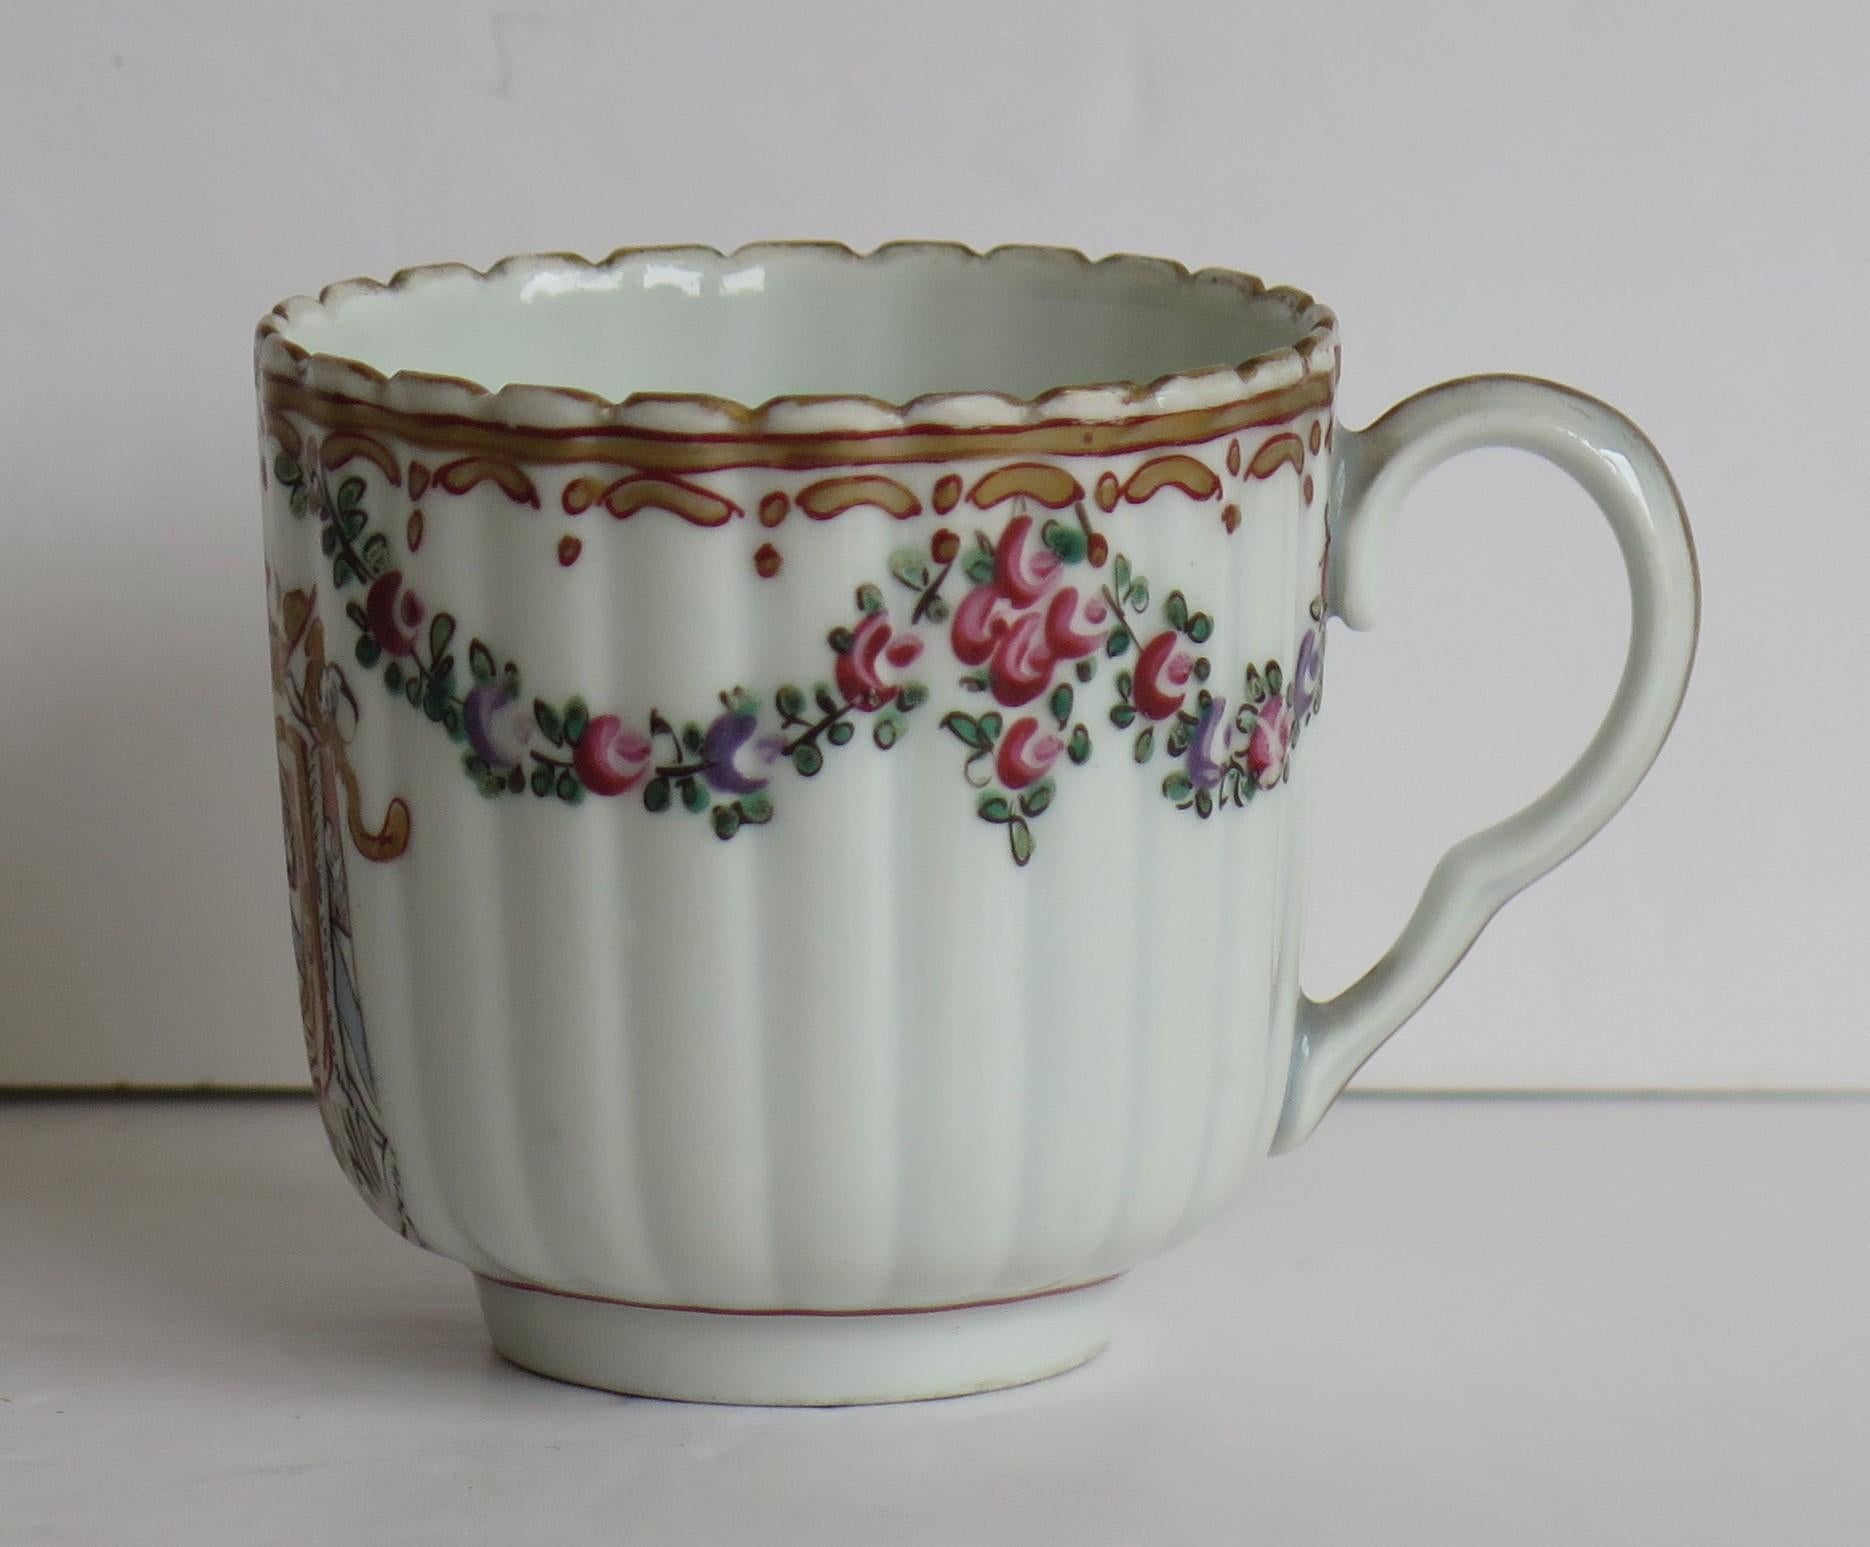 This is a high quality coffee cup in a hand enamelled and rare gilded Armorial pattern made by Worcester during the late 18th Century, circa 1795

The coffee cup is well potted and nominally parallel, with 25 vertical flutes and a loop handle